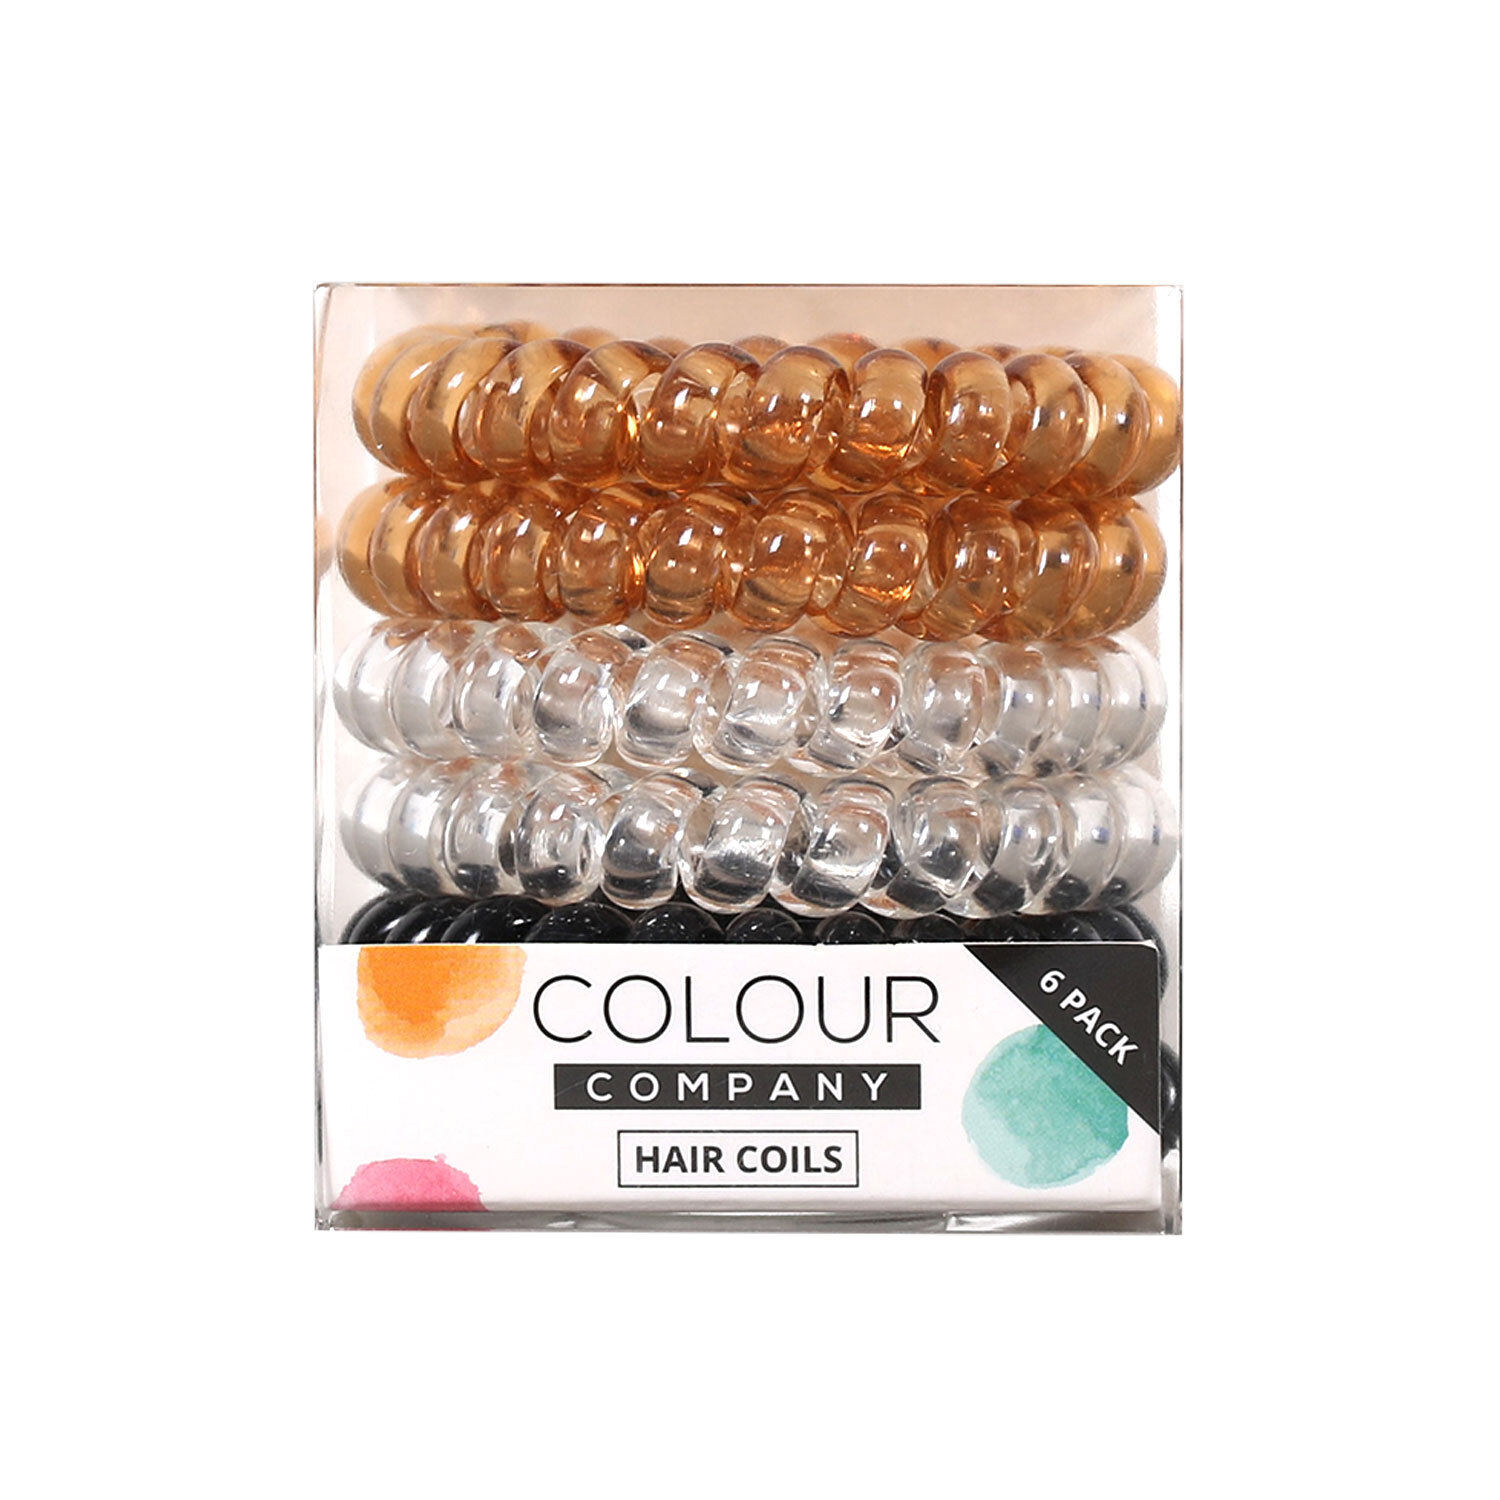 Pack of 6 Colour Hair Coils Image